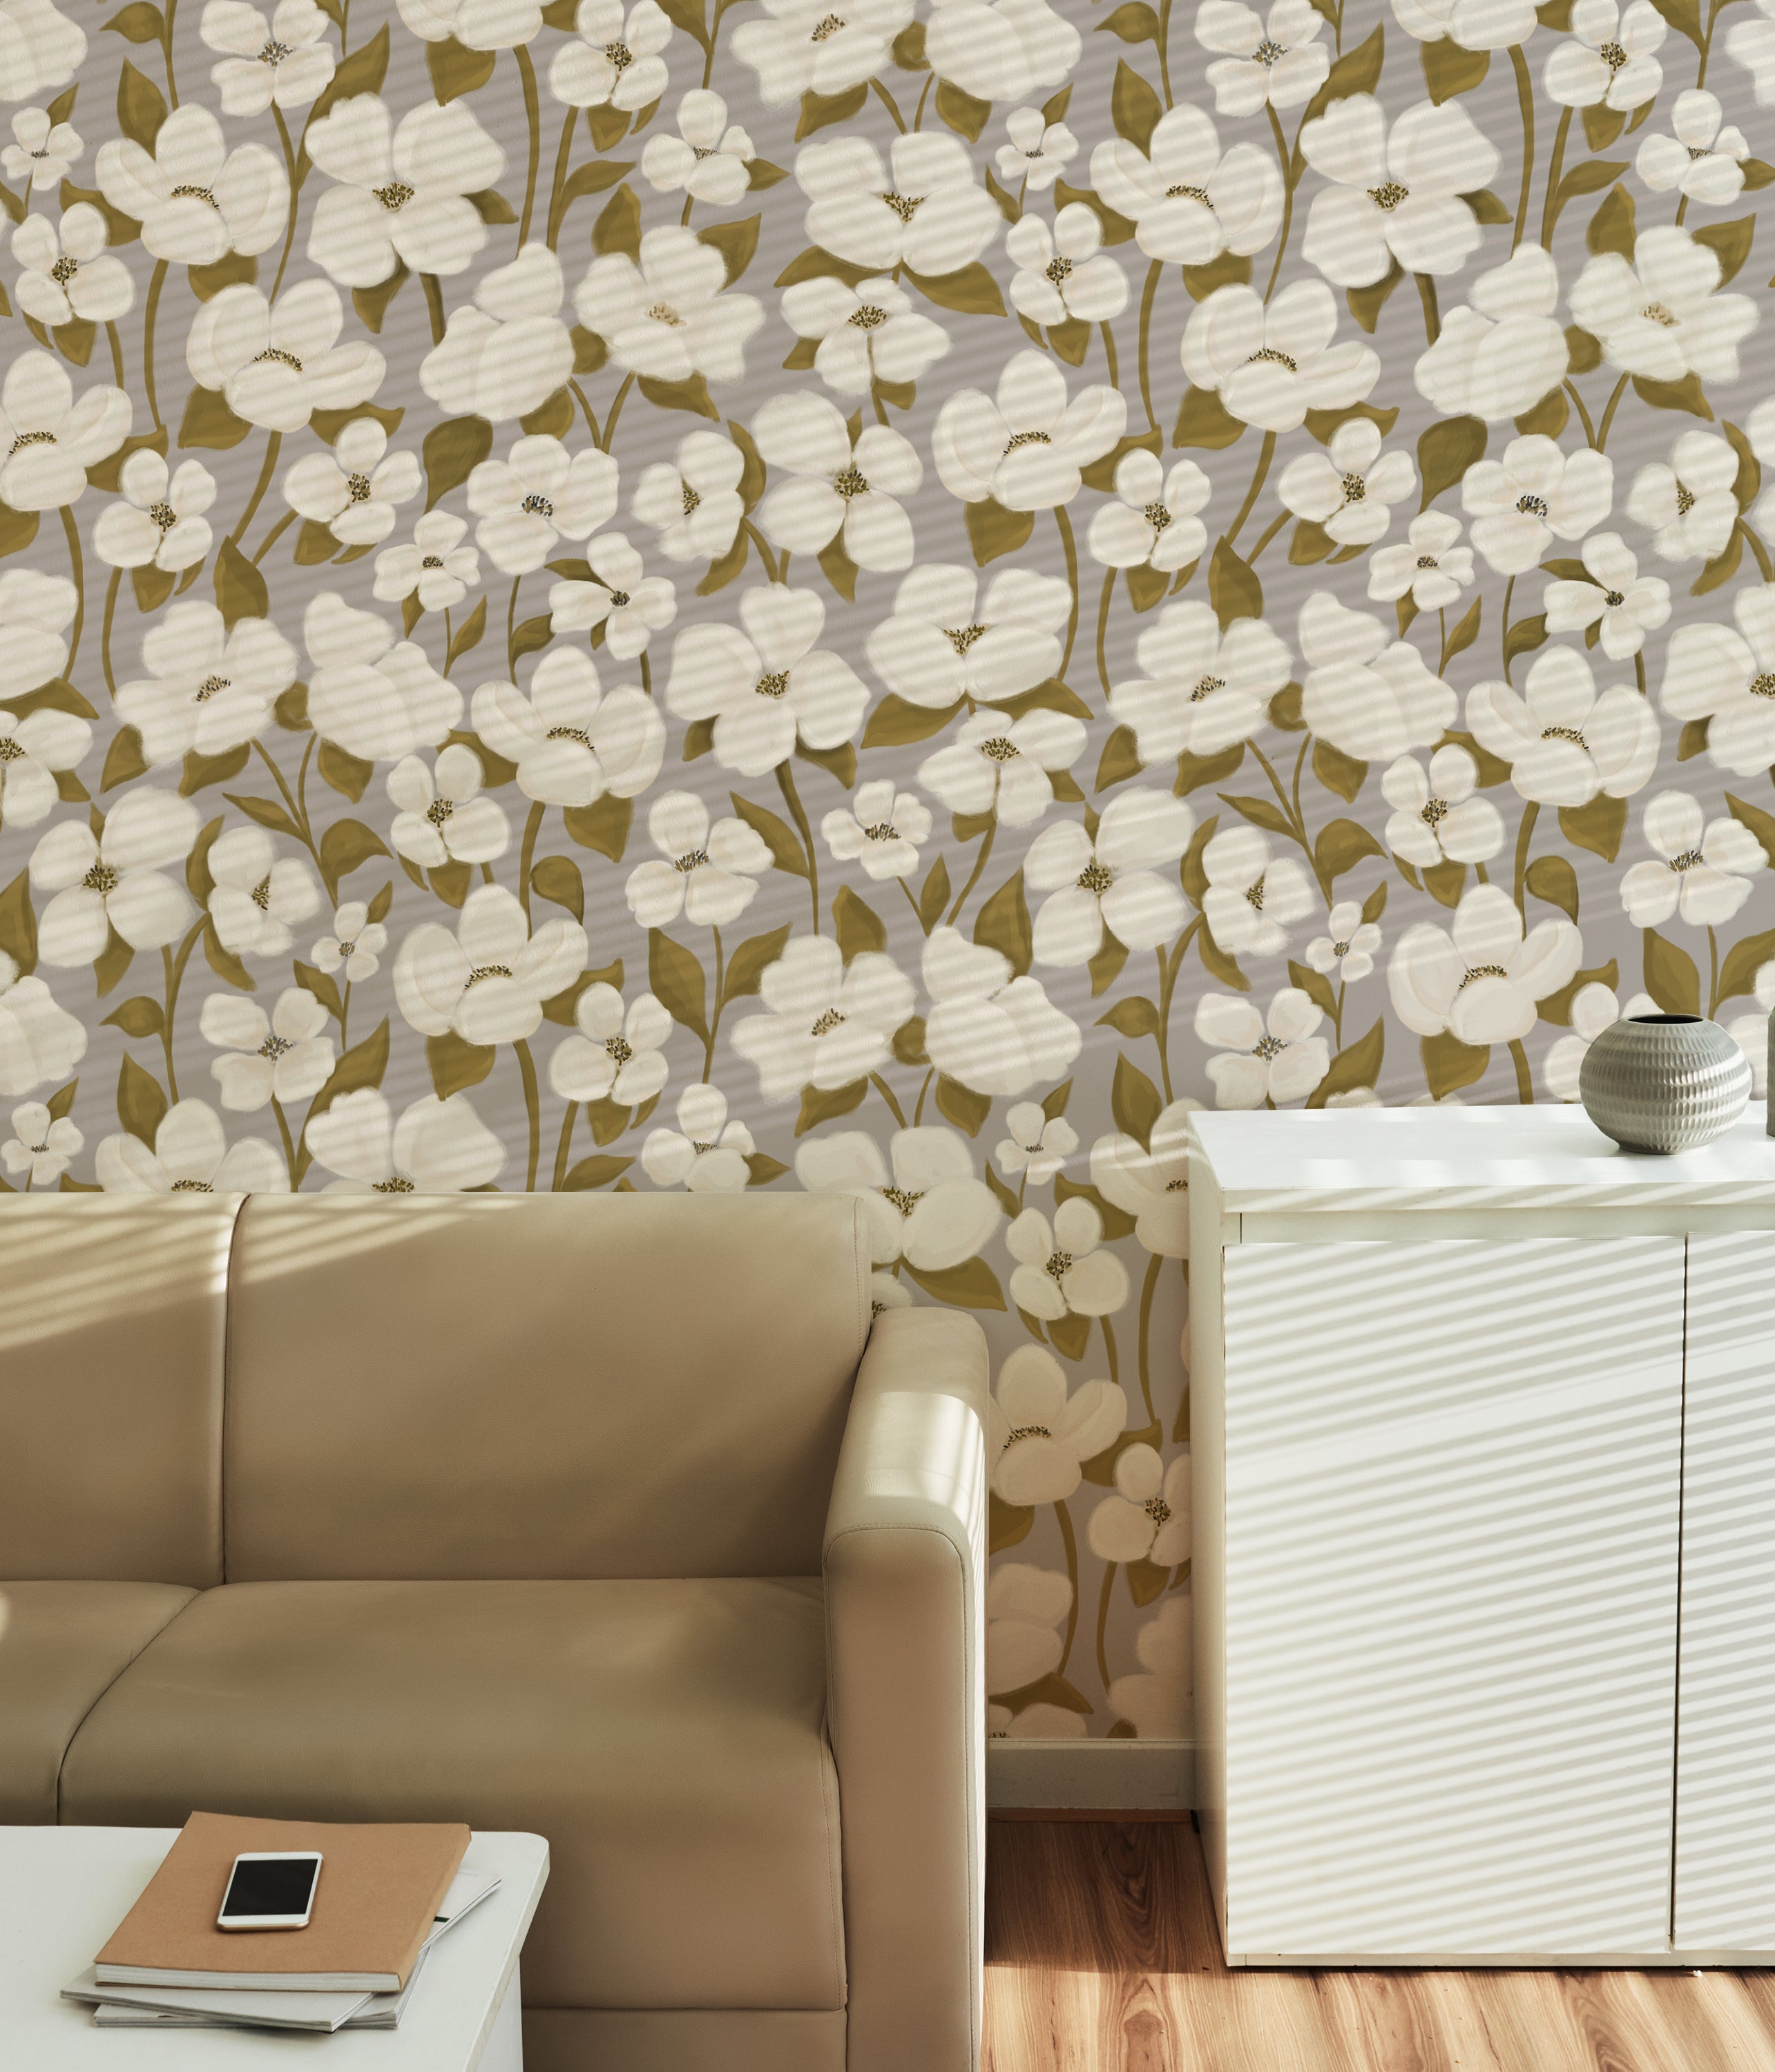 Living room setup with White Fleur Wallpaper - 50" as a backdrop. The wallpaper features a charming floral pattern with white blossoms and green foliage, adding a touch of elegance and warmth to the modern decor.